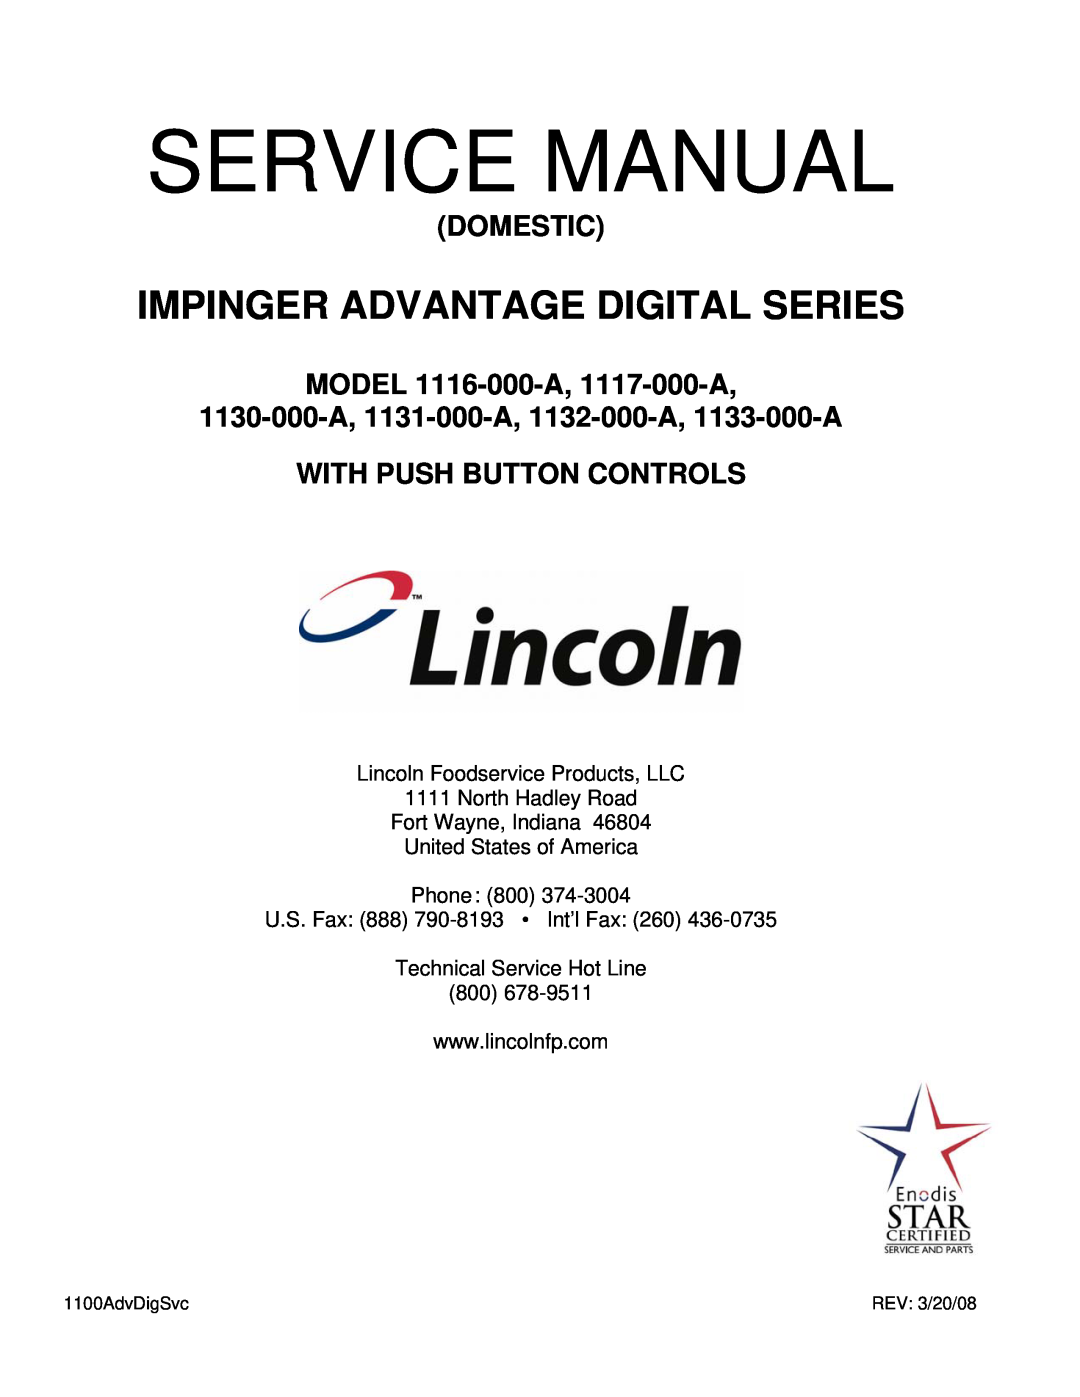 Lincoln 116-000-A service manual Lincoln Foodservice Products, LLC, North Hadley Road Fort Wayne, Indiana, Service Manual 